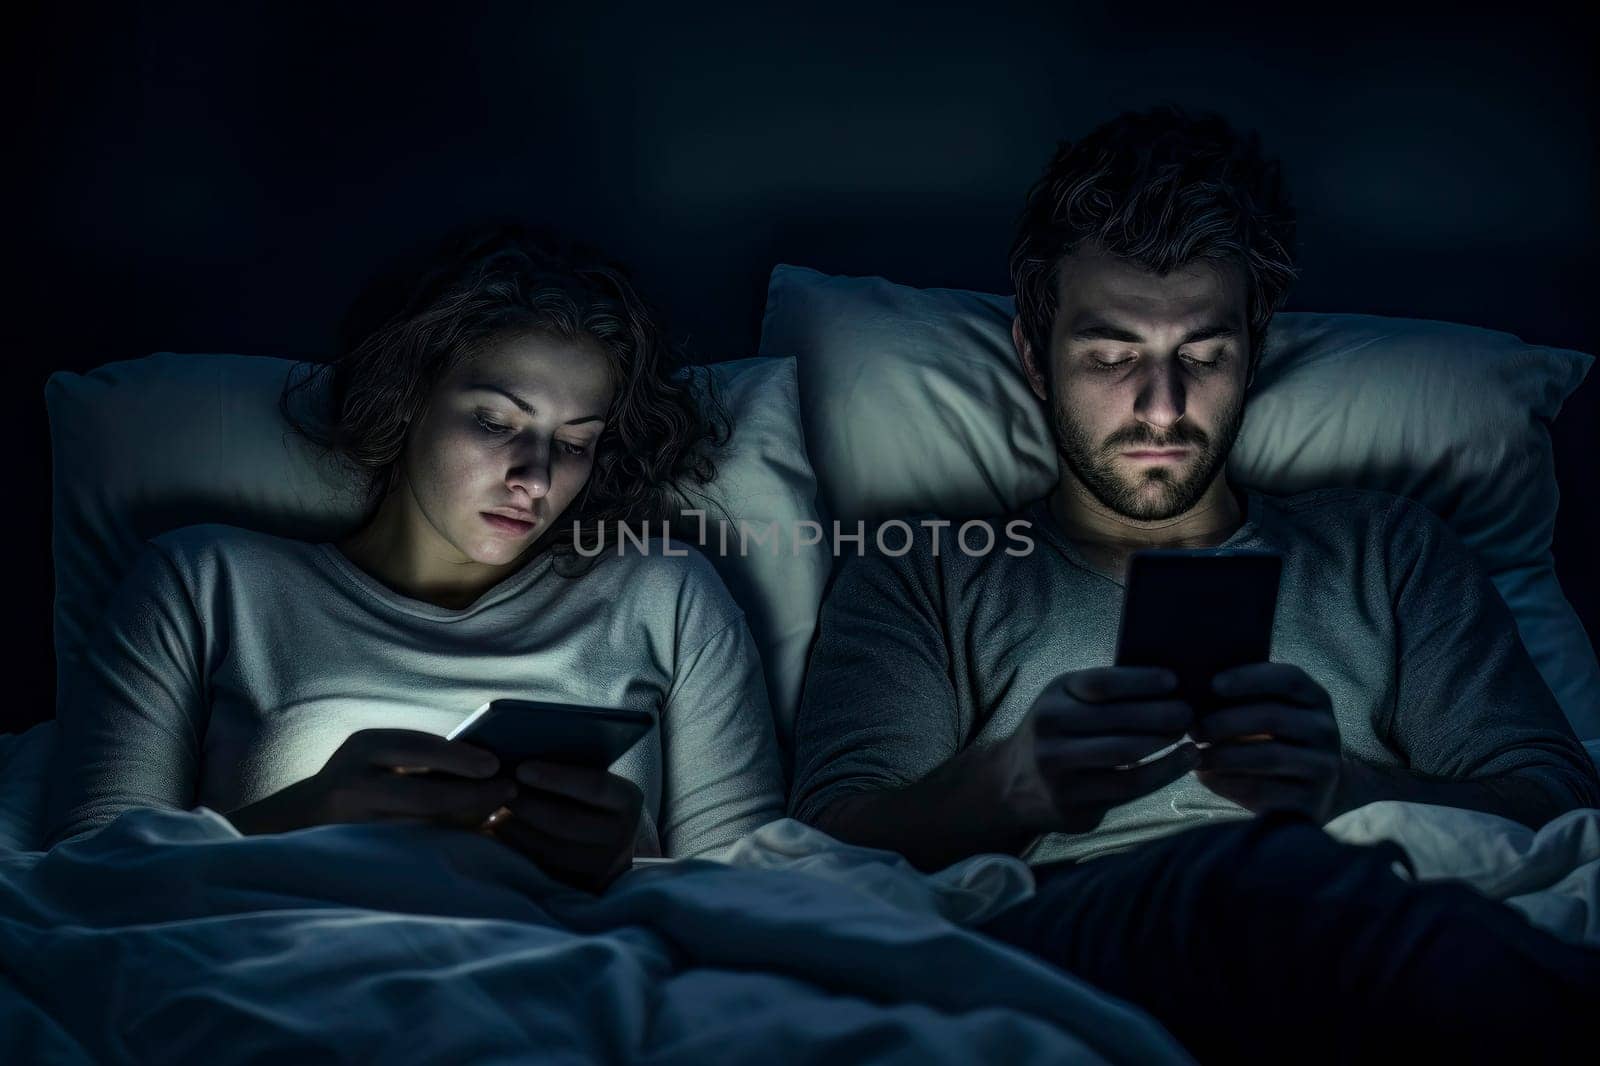 Couple in Bed, Absorbed in Smartphones by pippocarlot